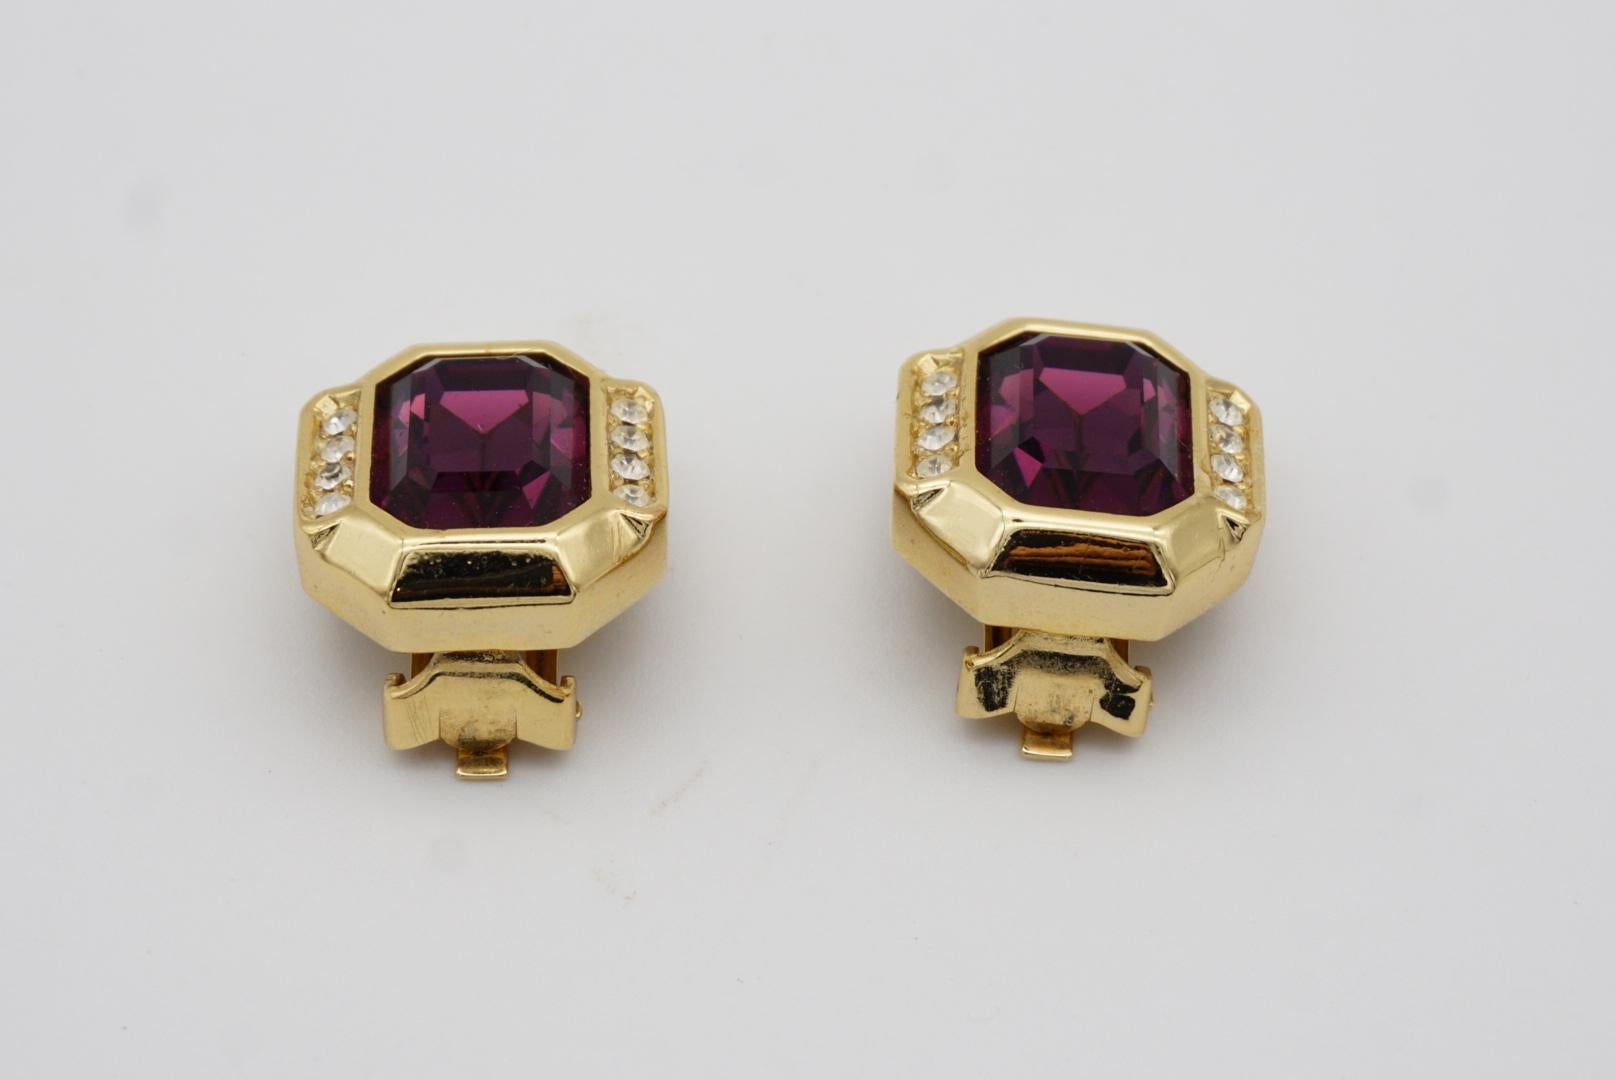 Christian Dior Vintage 1980s Amethyst Purple Crystals Octagonal Clip Earrings For Sale 6